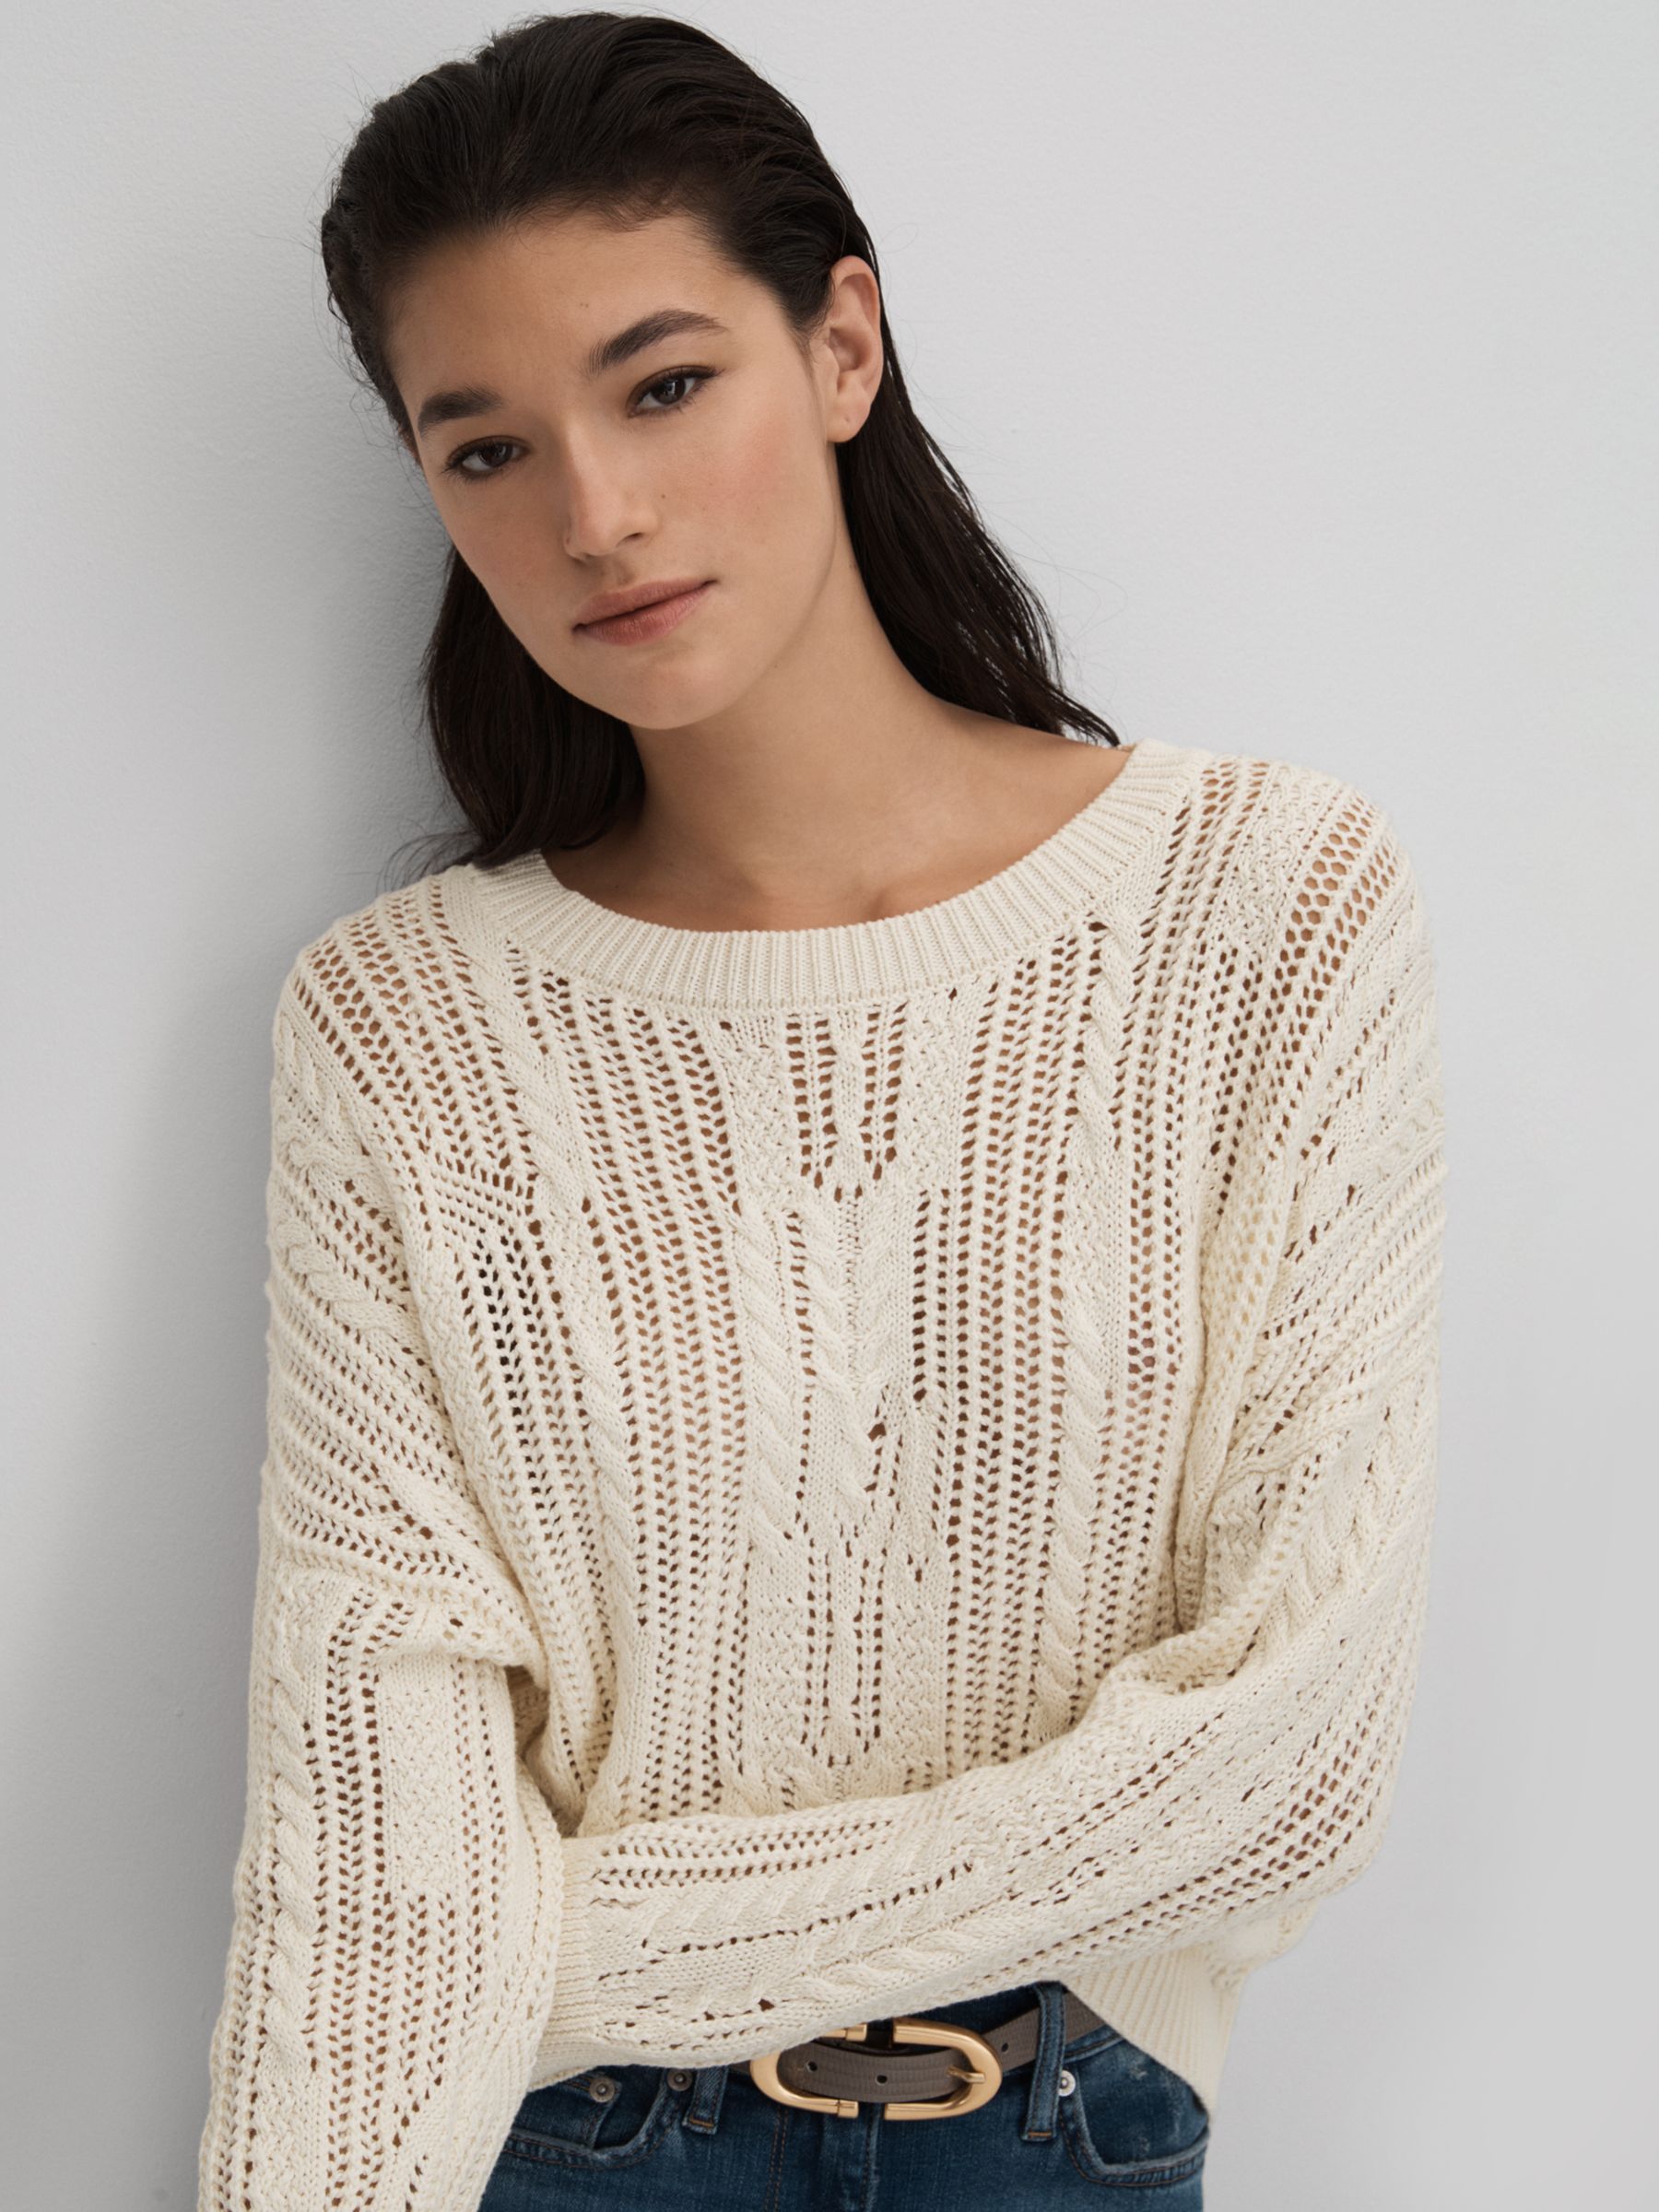 Reiss Tanya Cotton Blend Open Stitch Jumper, Ivory at John Lewis & Partners